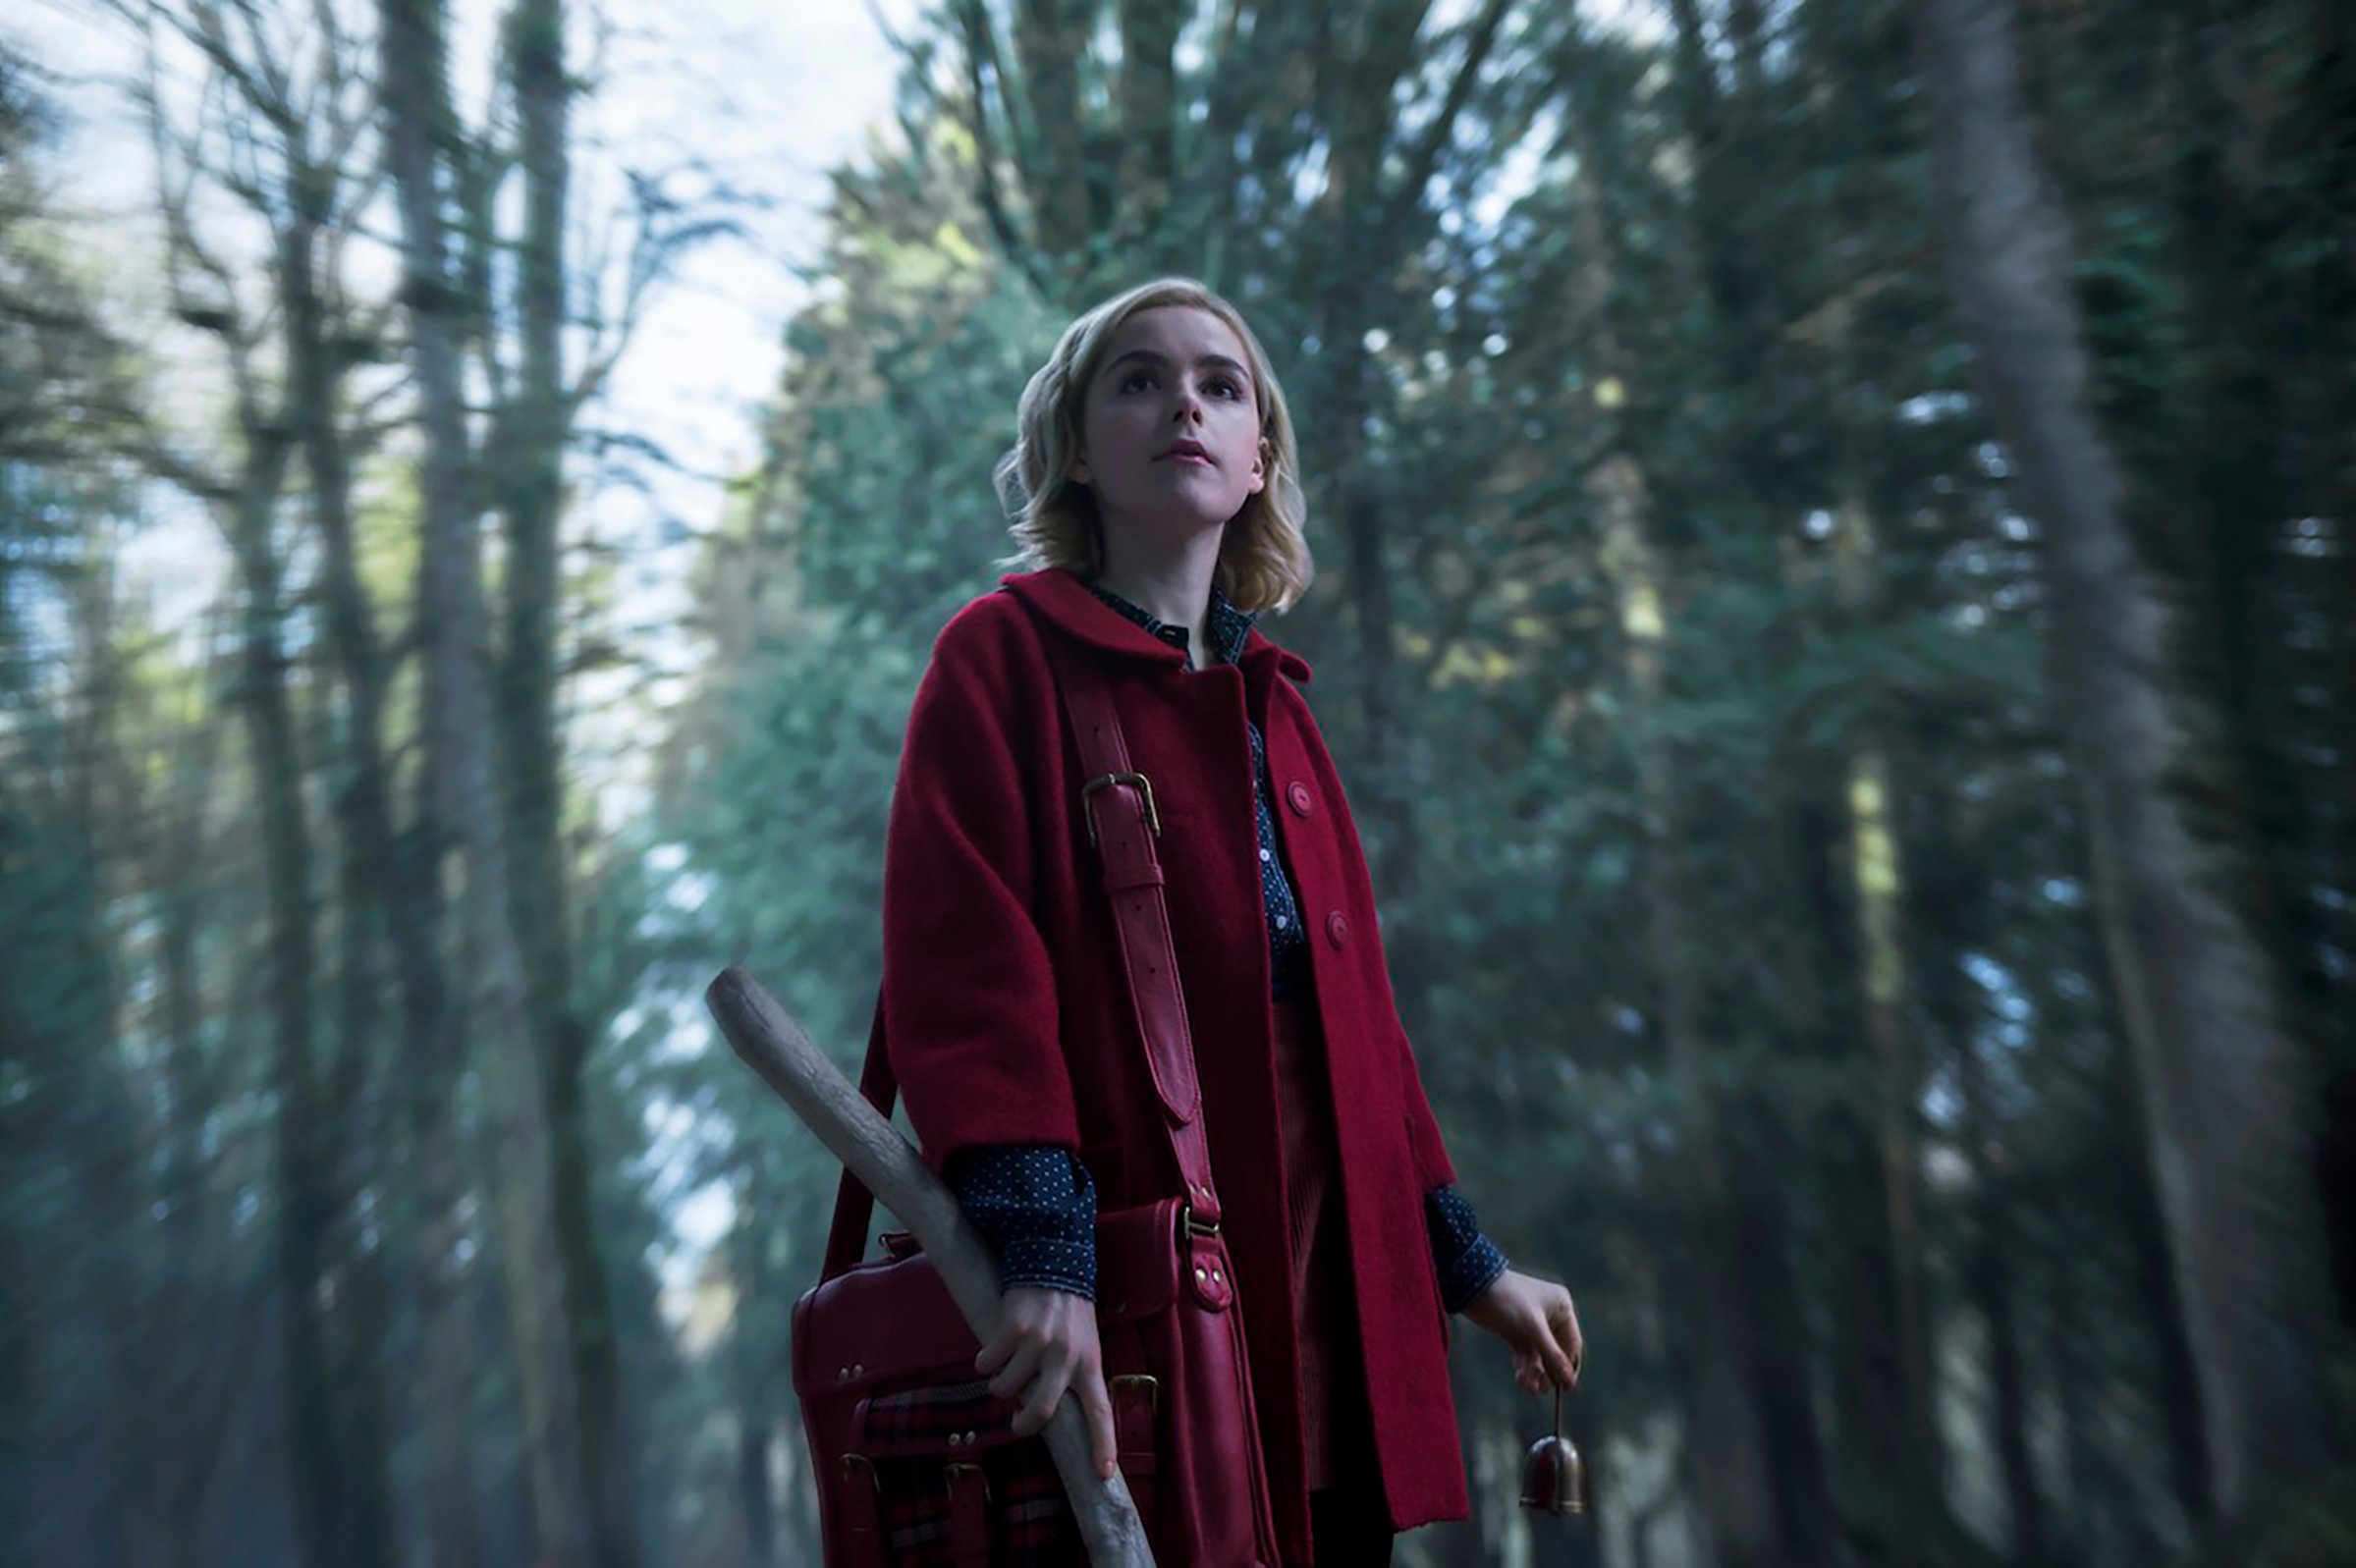 From Mad Men to good witch: Shipka stars in Sabrina